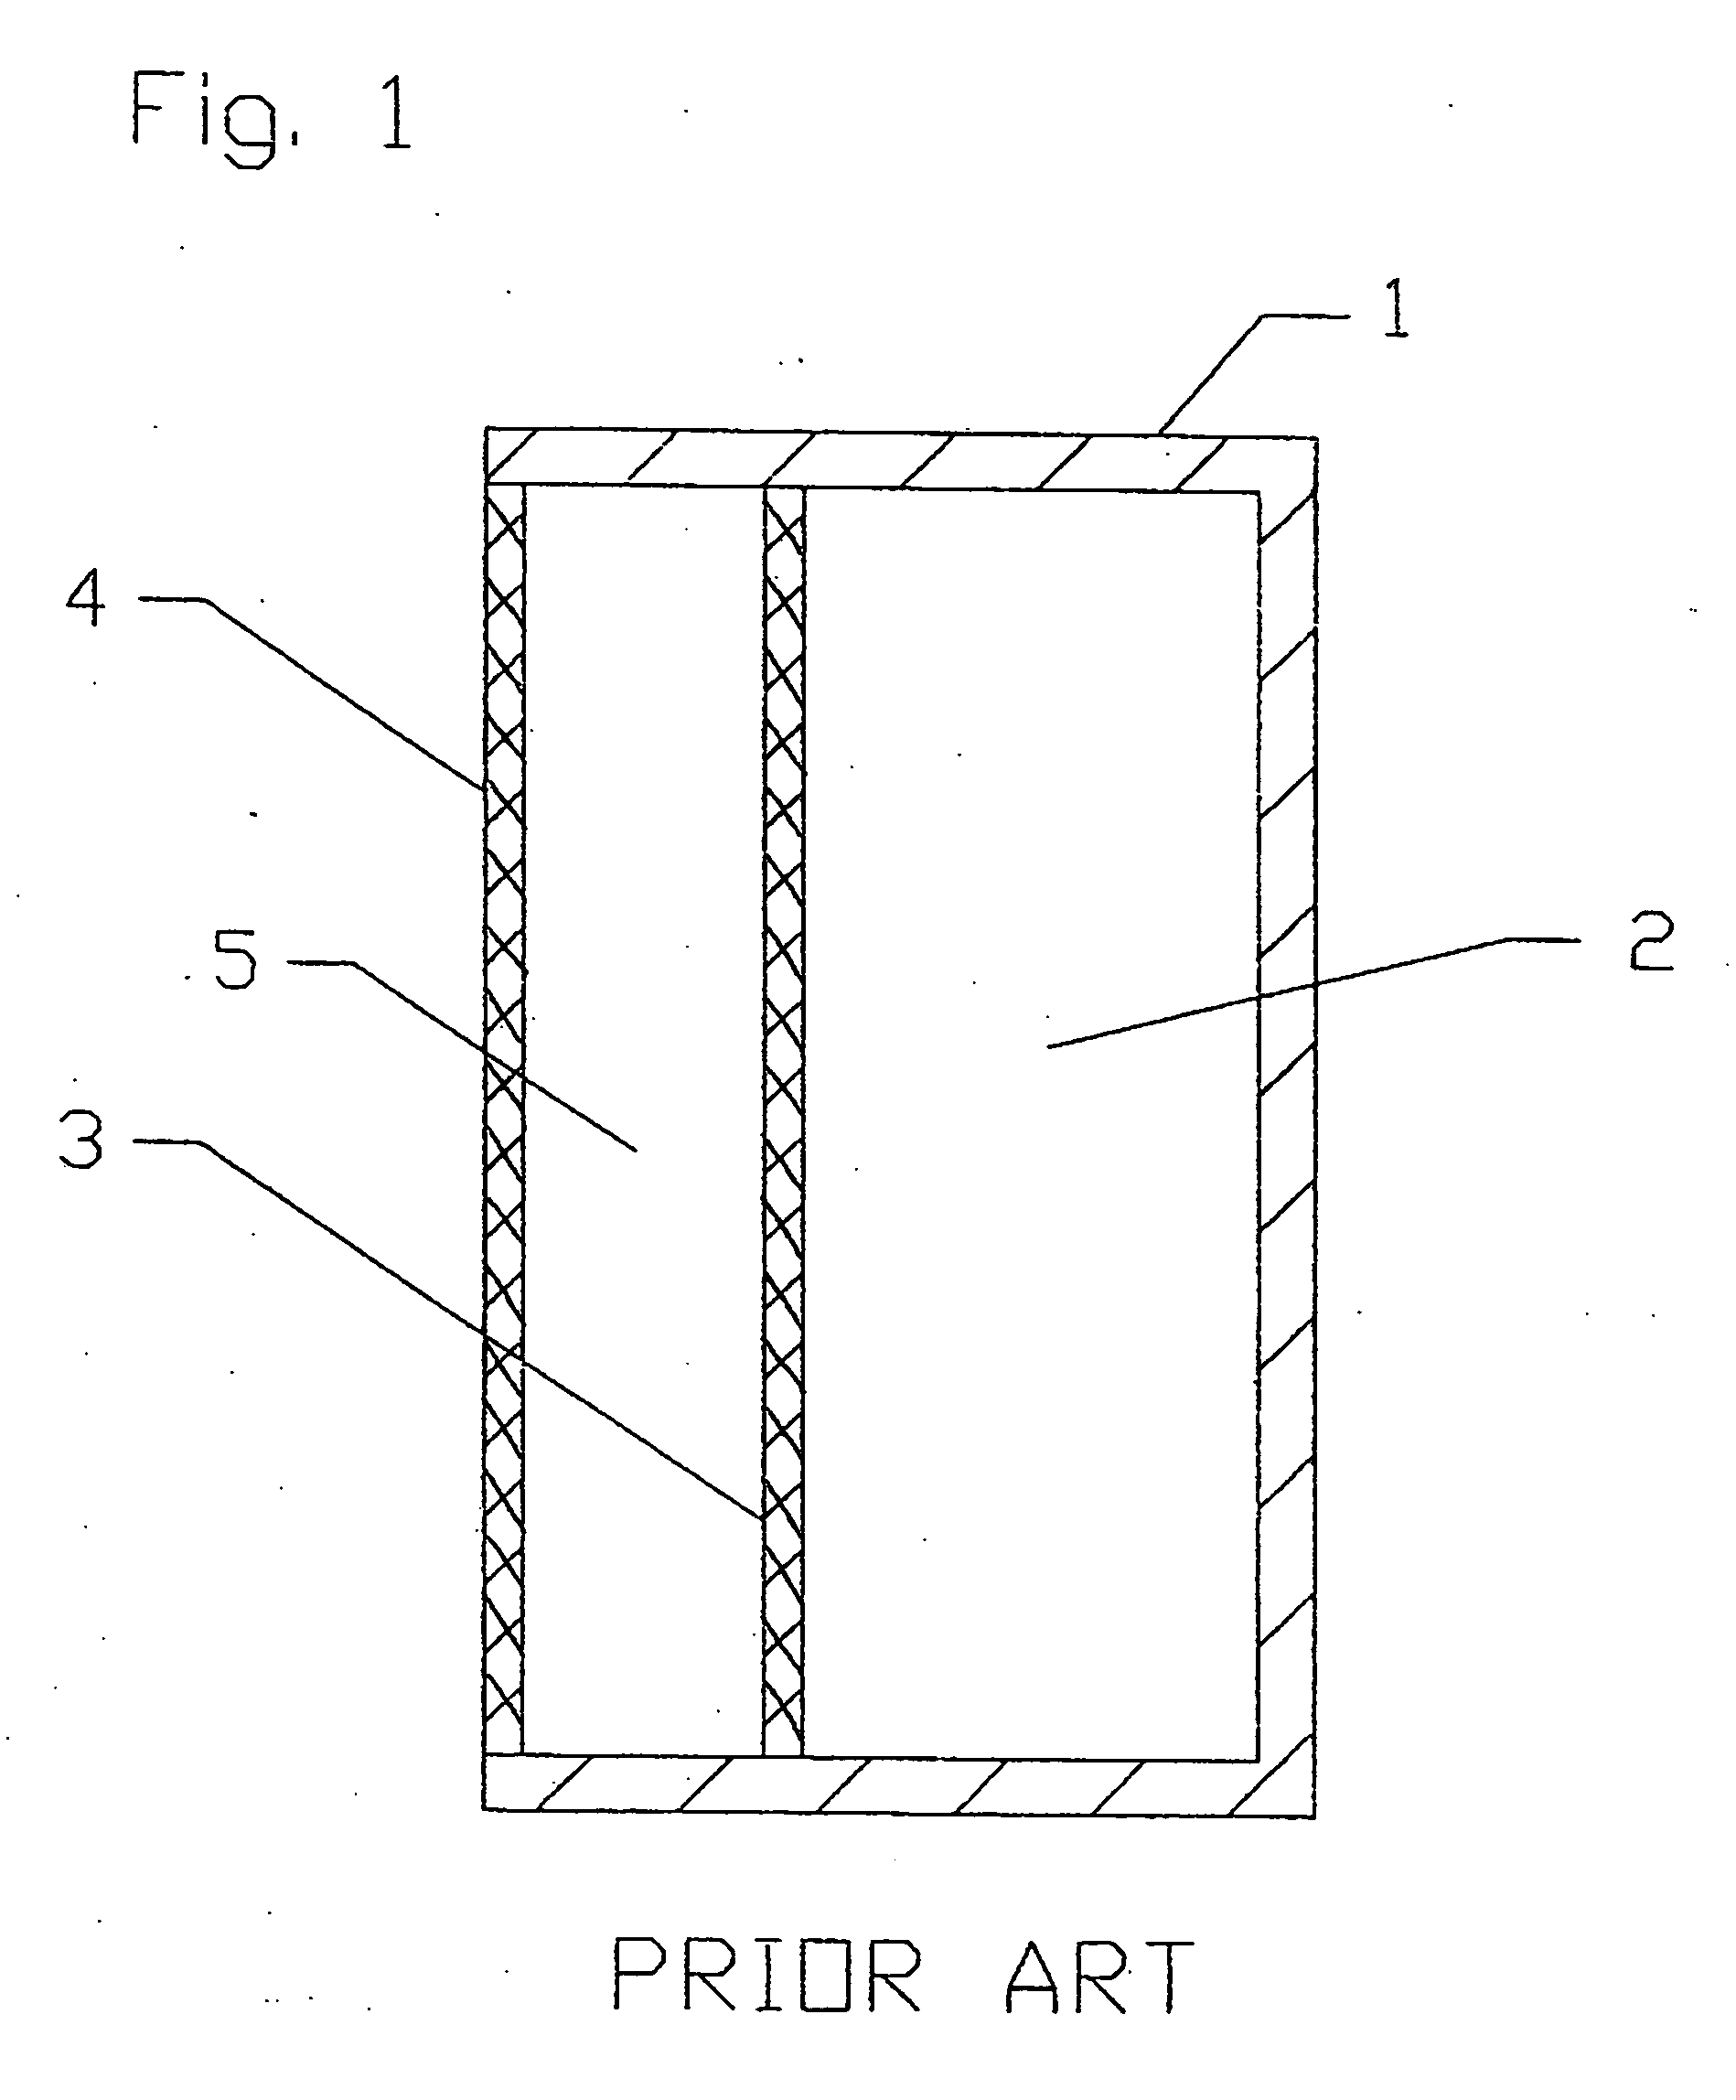 Direct liquid fuel cell and method of peventing fuel decomposition in a direct liquid fuel cell